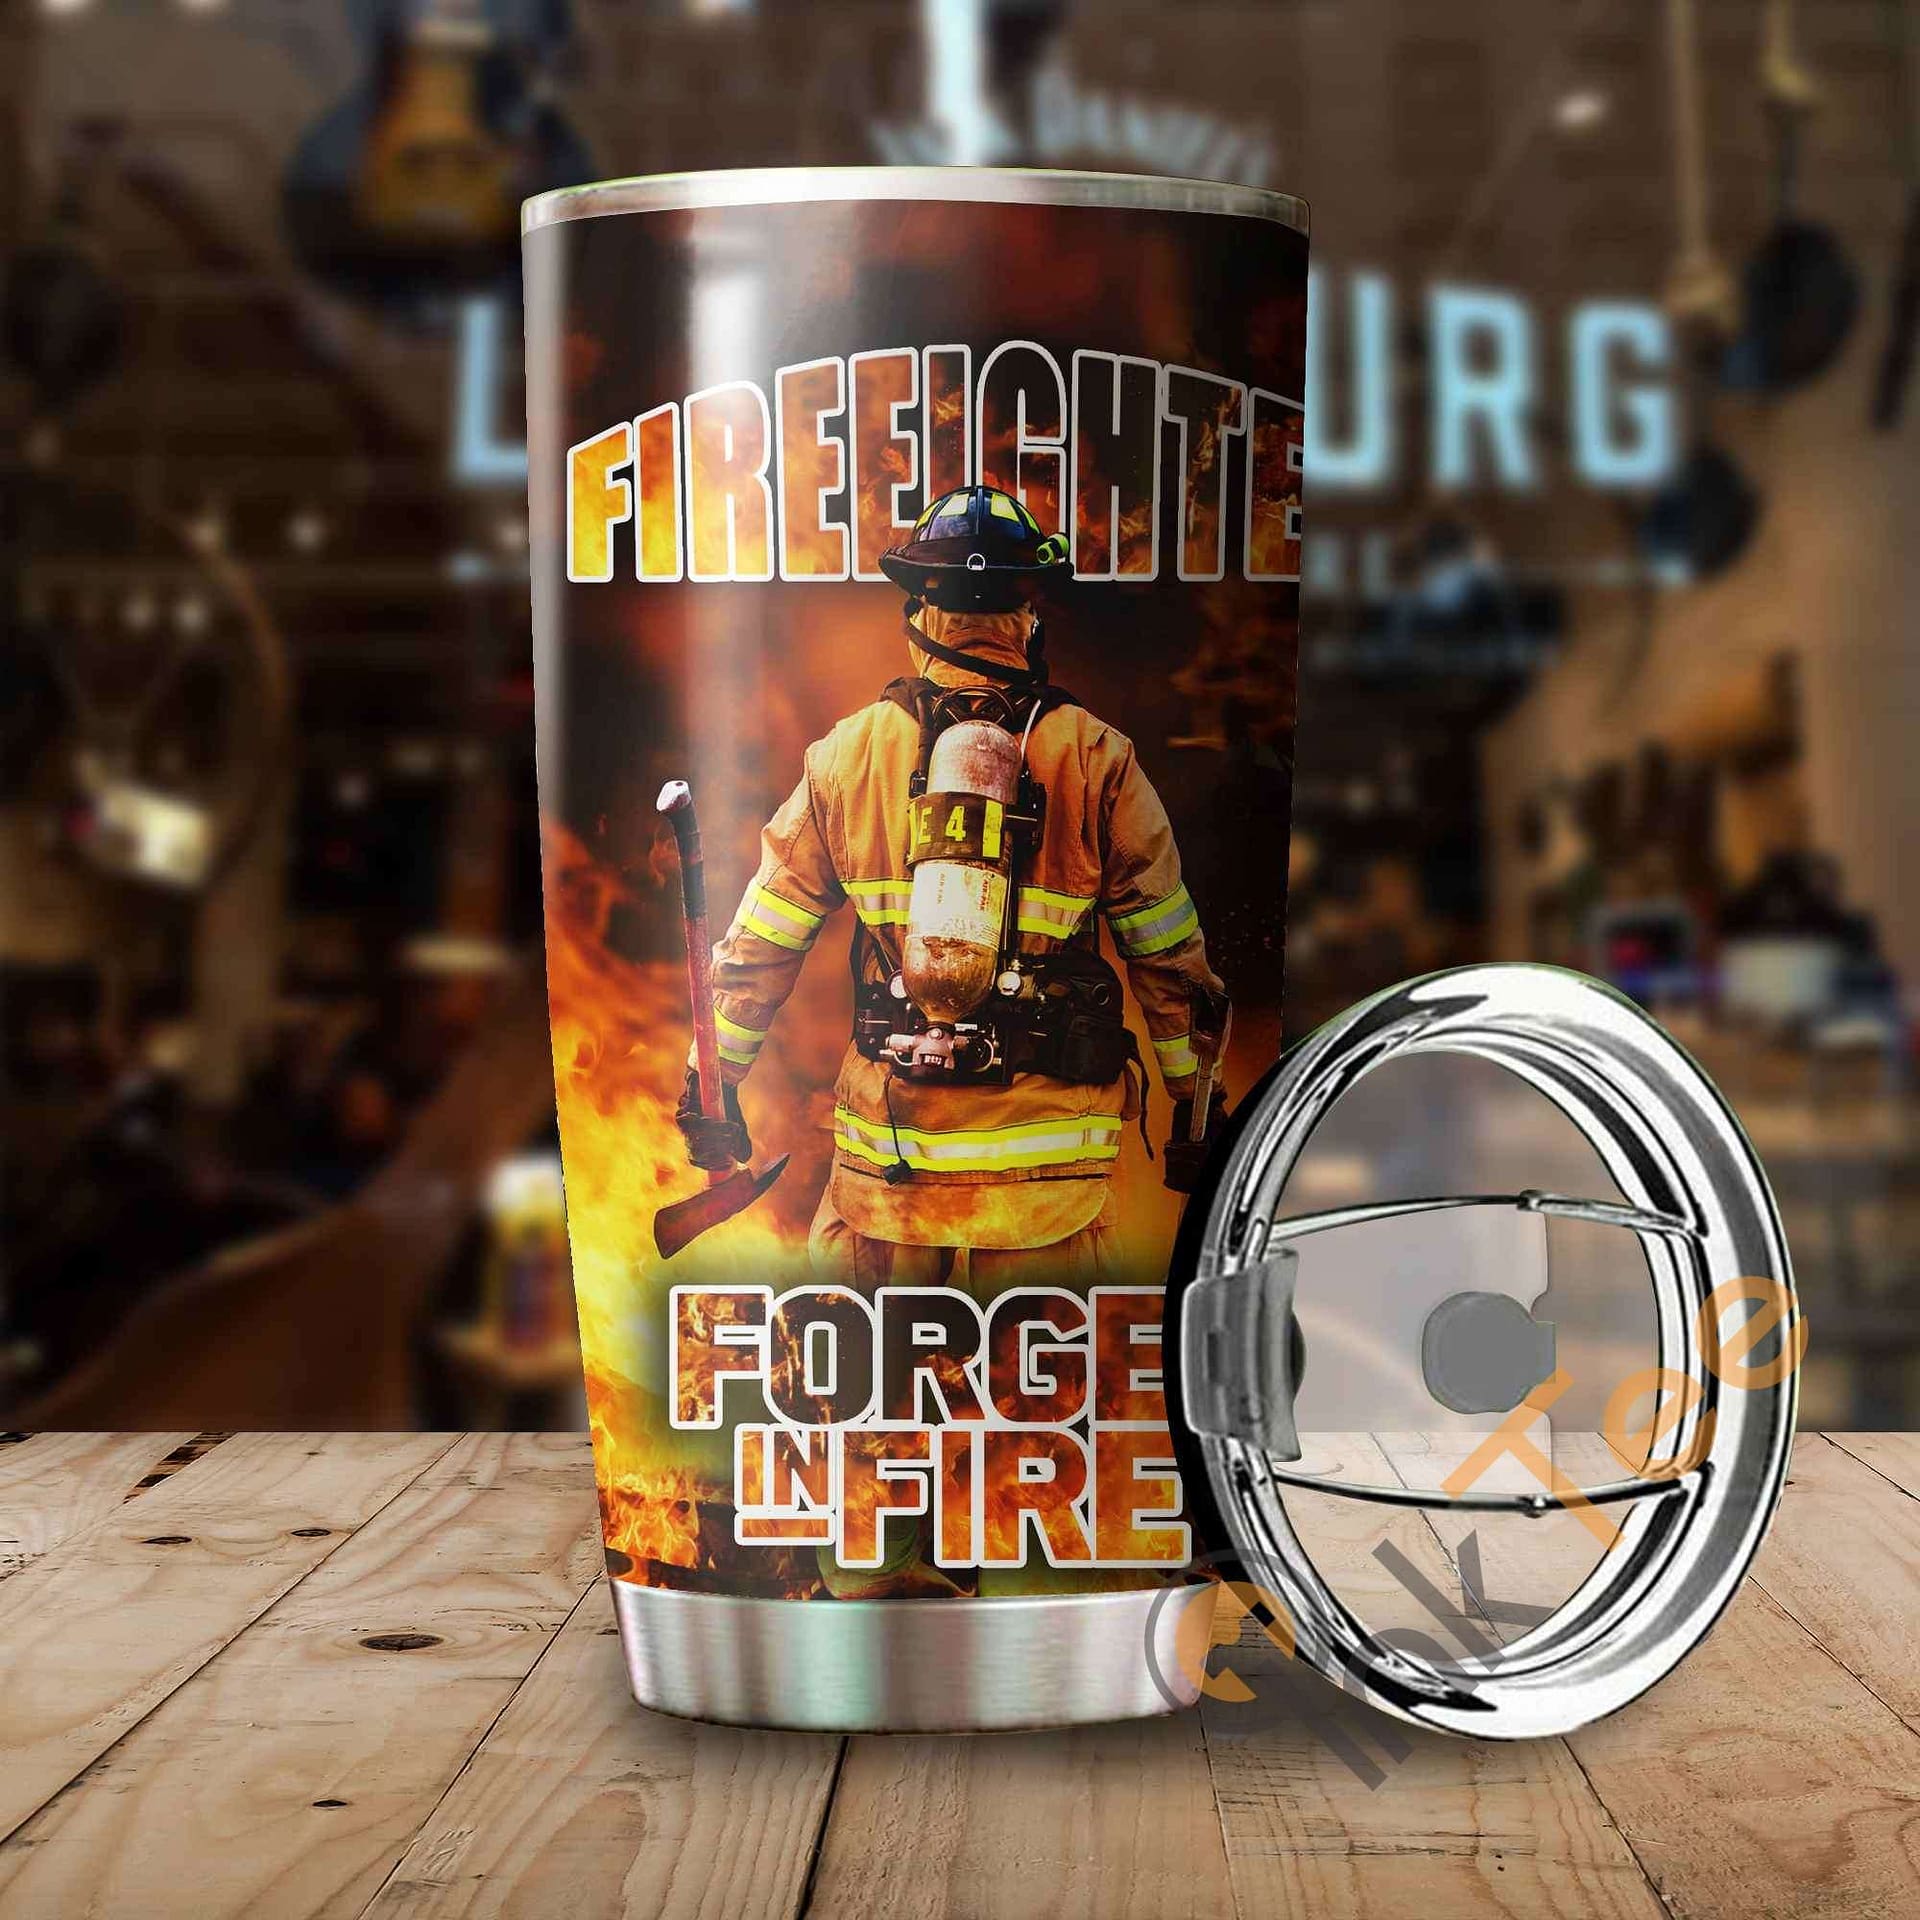 Firefighter  Forged In Fire Amazon Best Seller Sku 2759 Stainless Steel Tumbler